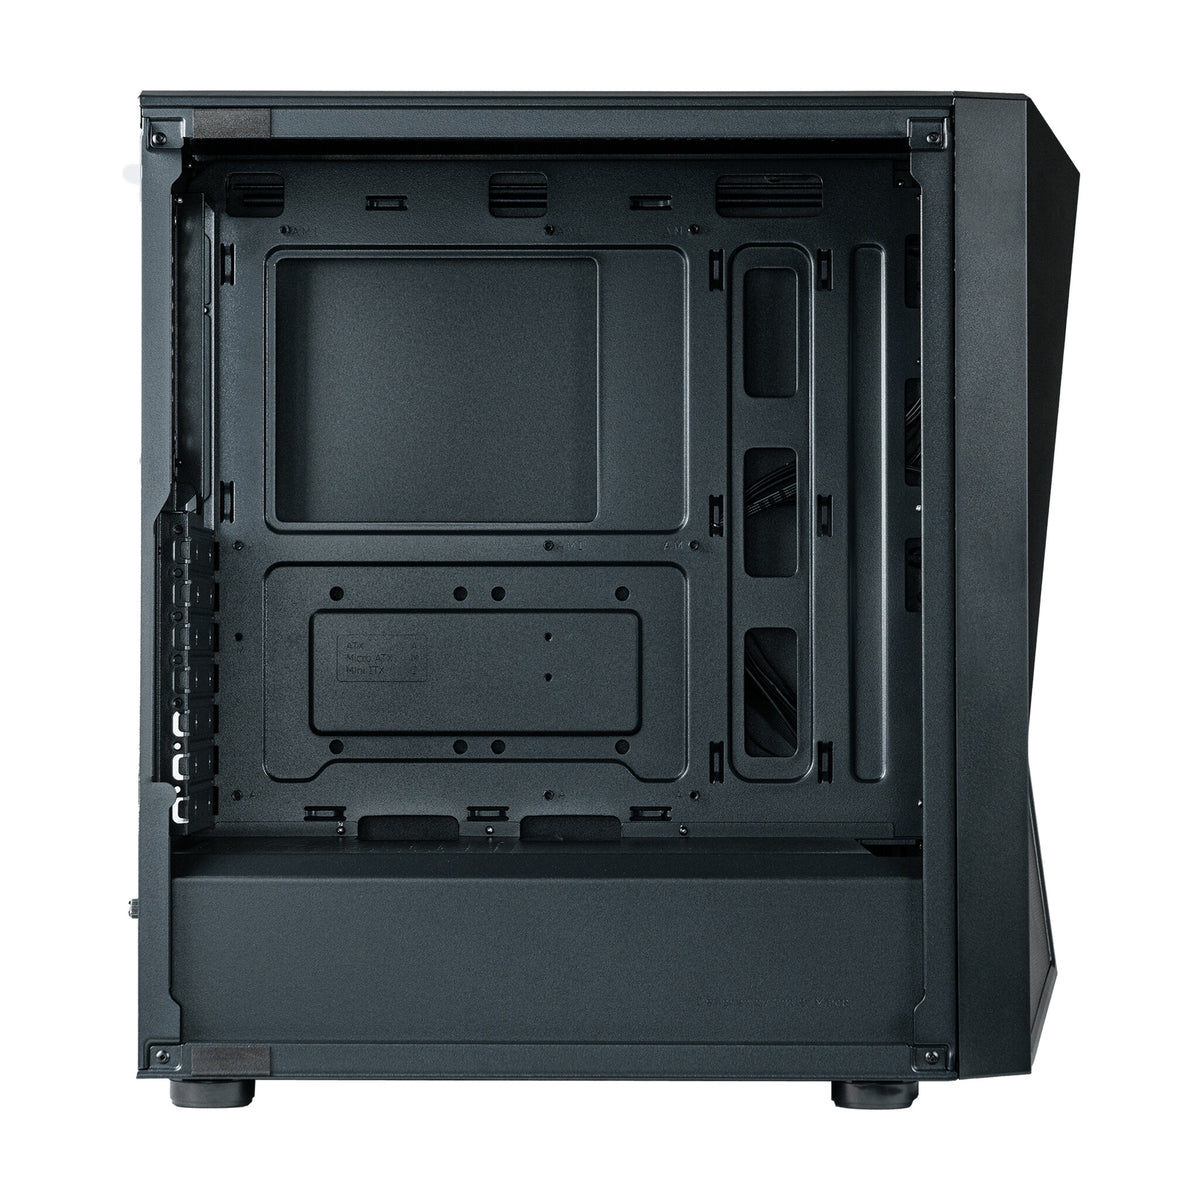 Cooler Master CMP 520 - ATX Mid Tower Case in Black